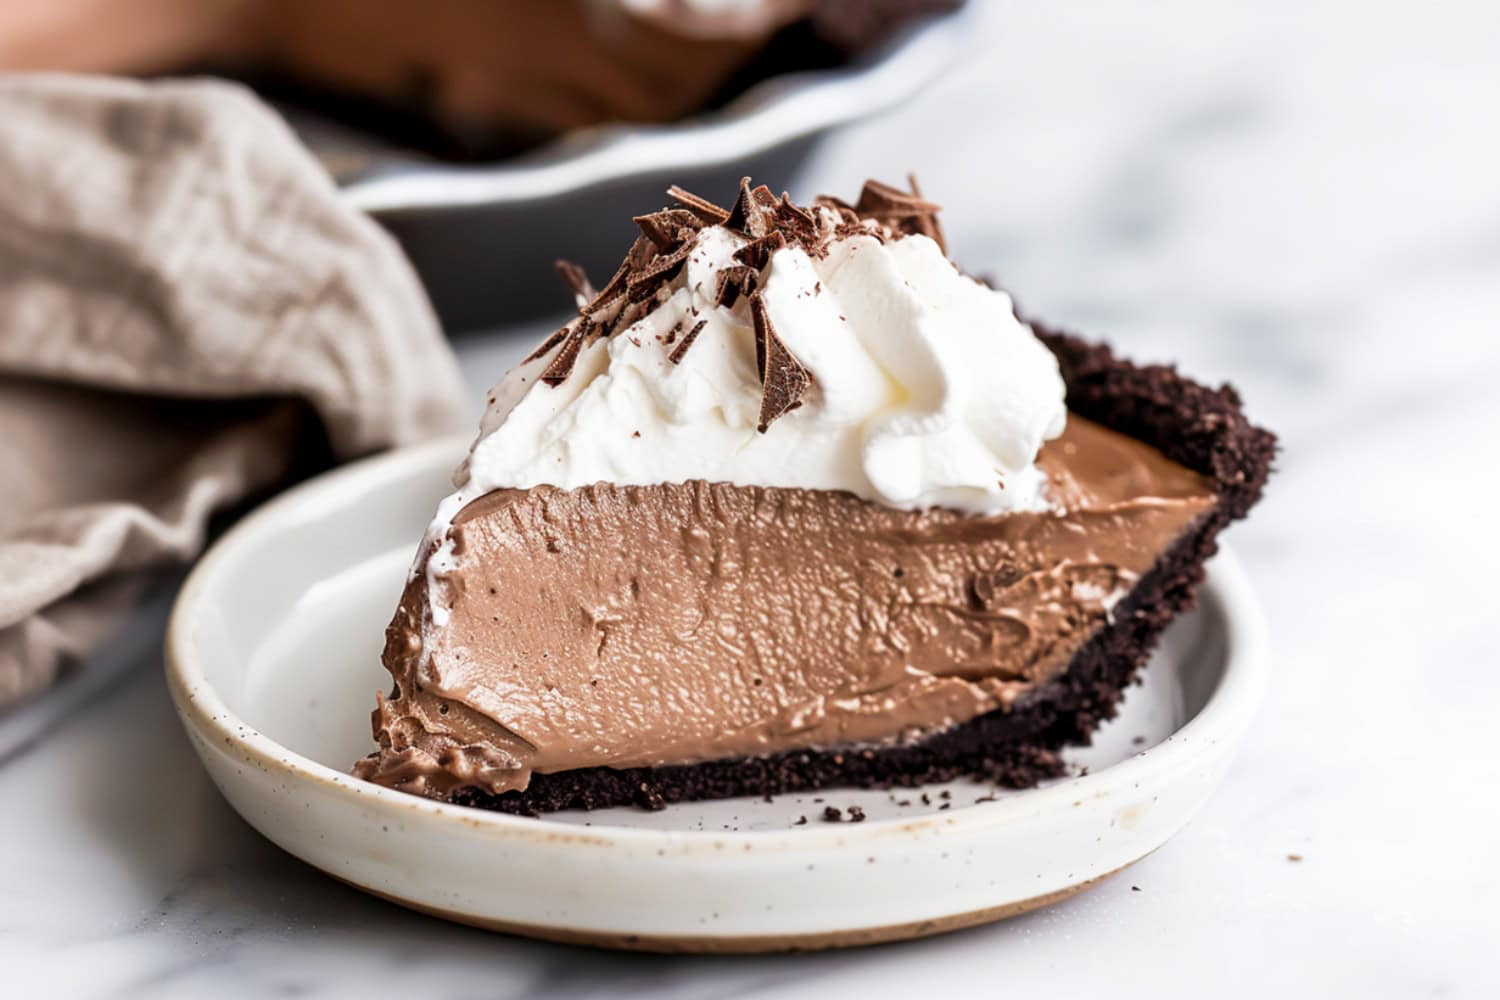 French silk pie served on a dessert plate with a dollop of whipped cream and chocolate shavings